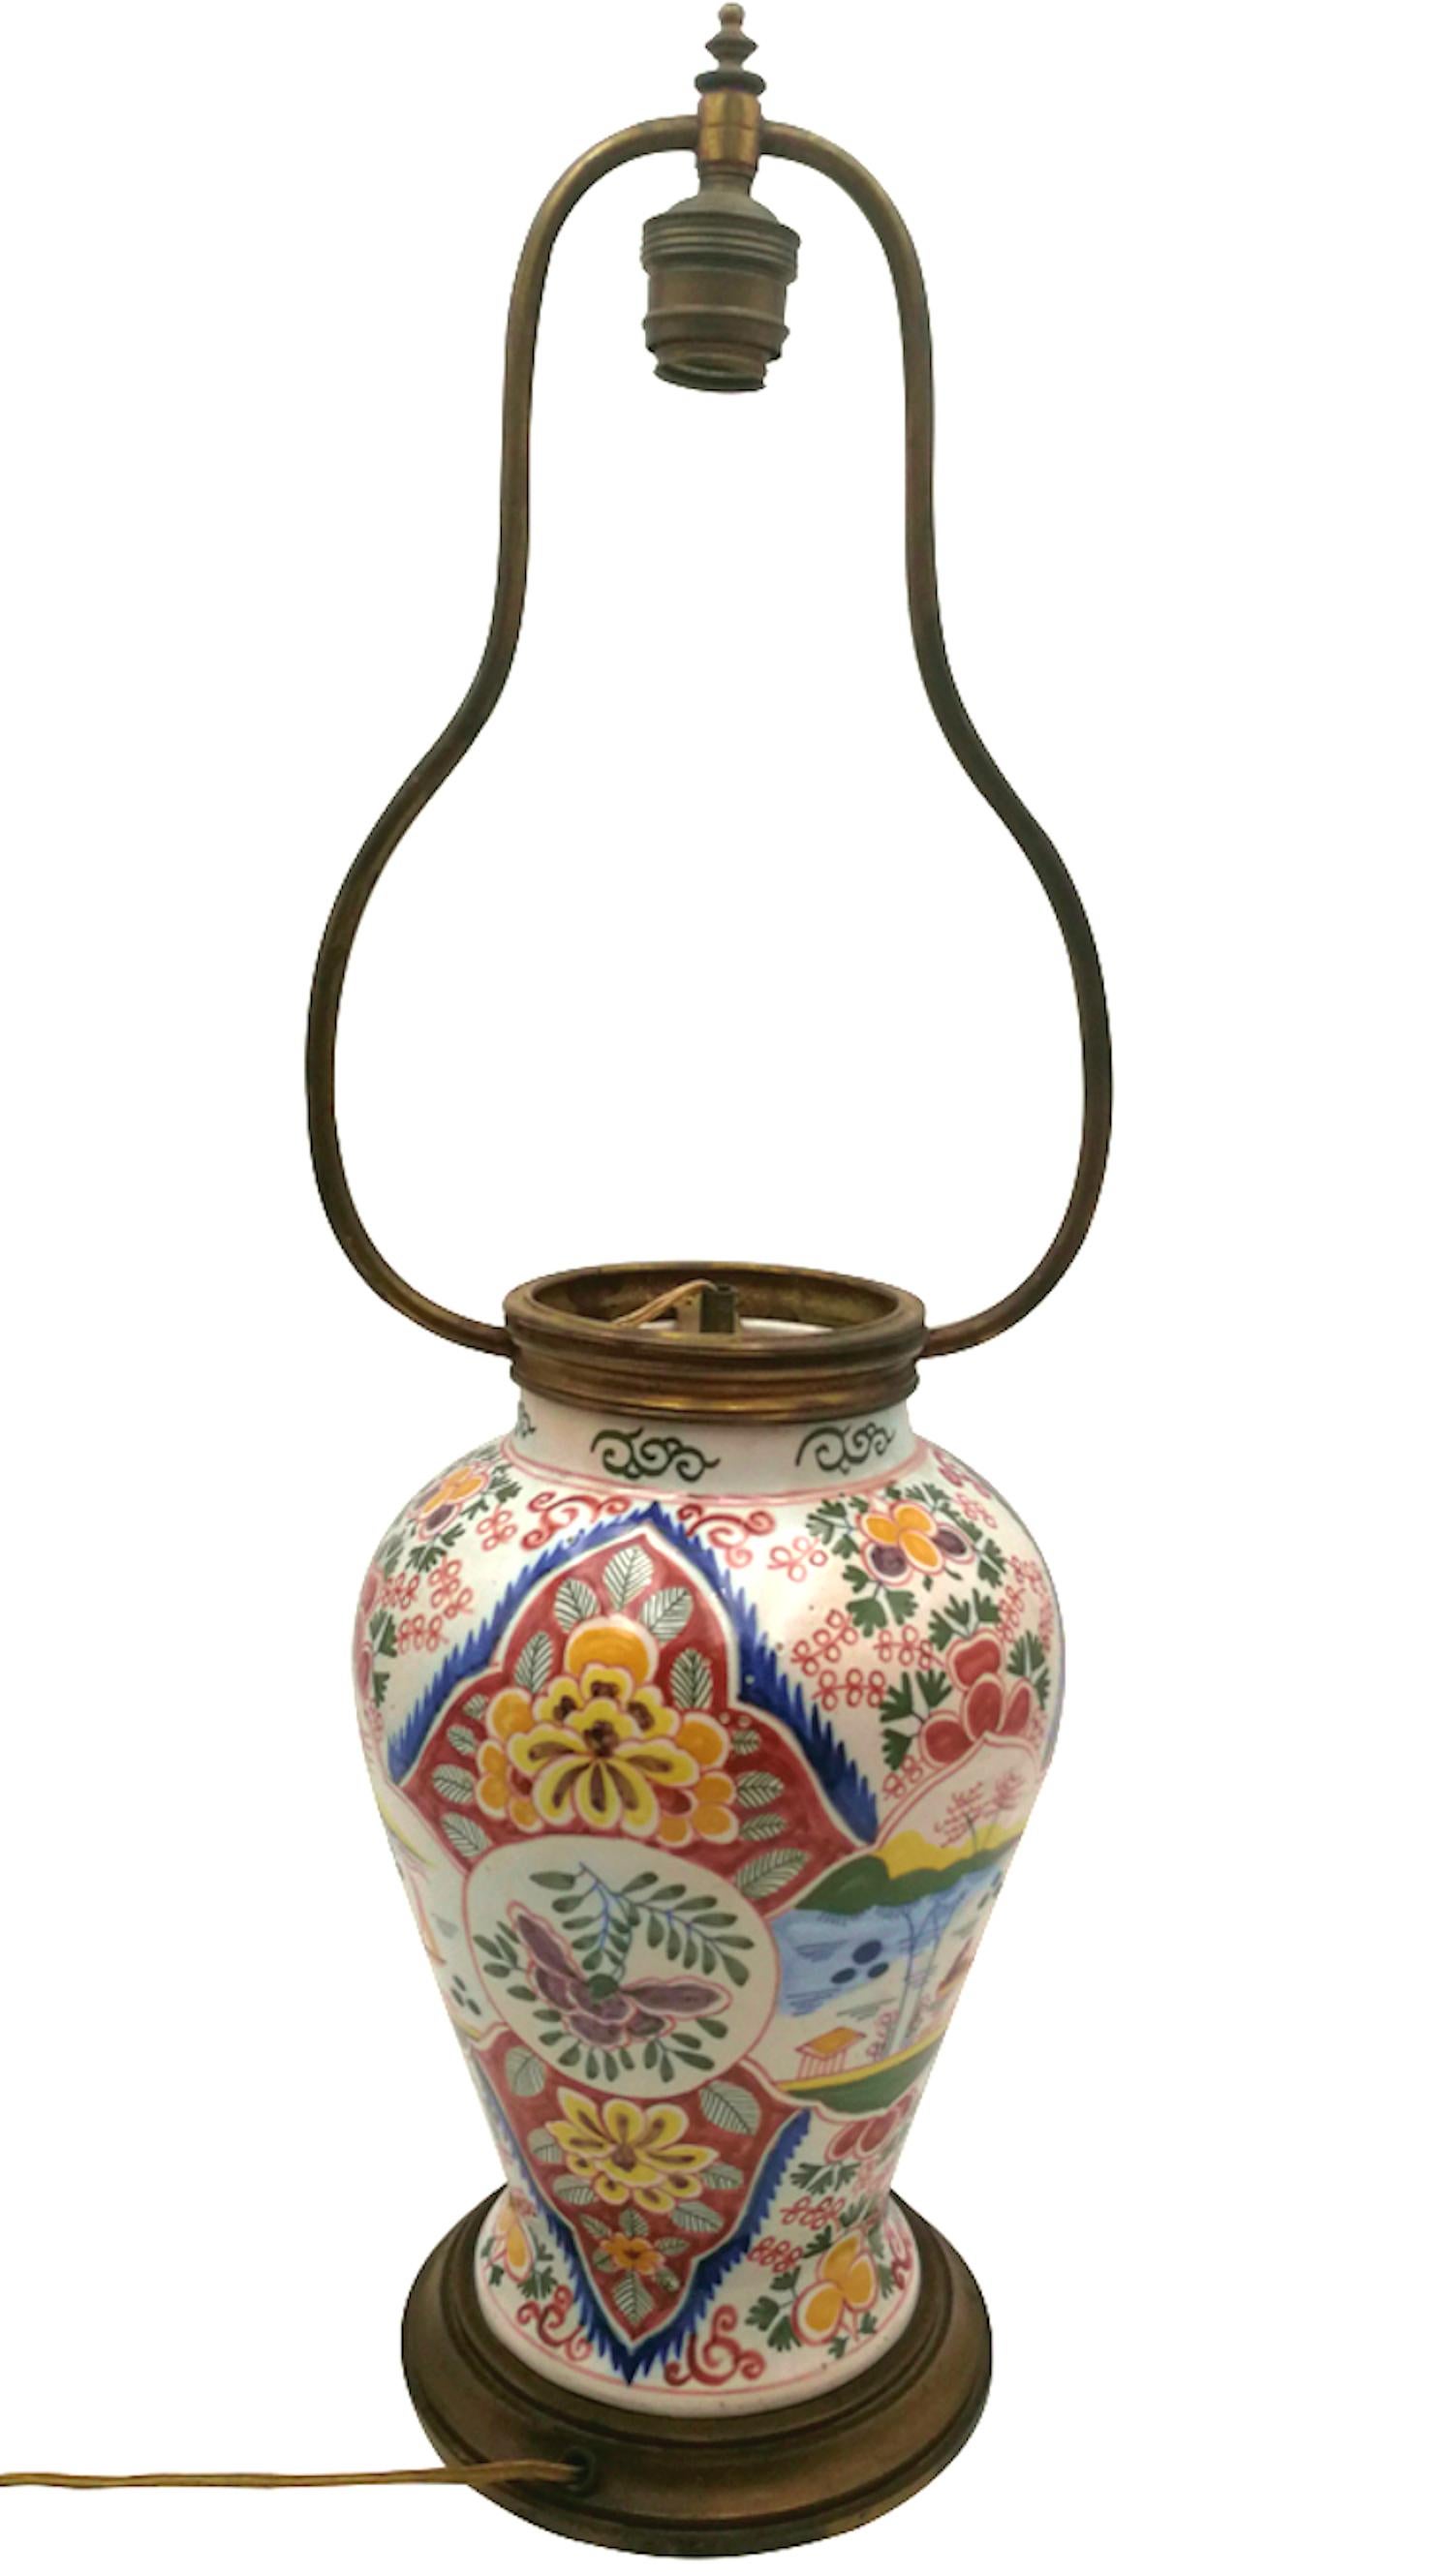 A table lamp mounted on a hand-painted early 20th-century Delft vase, decorated with Chinese-
inspired floral motifs and a character in a boat. The wide colour palette is unusual for this type of
ceramic. The base and shade holder are in bronze or